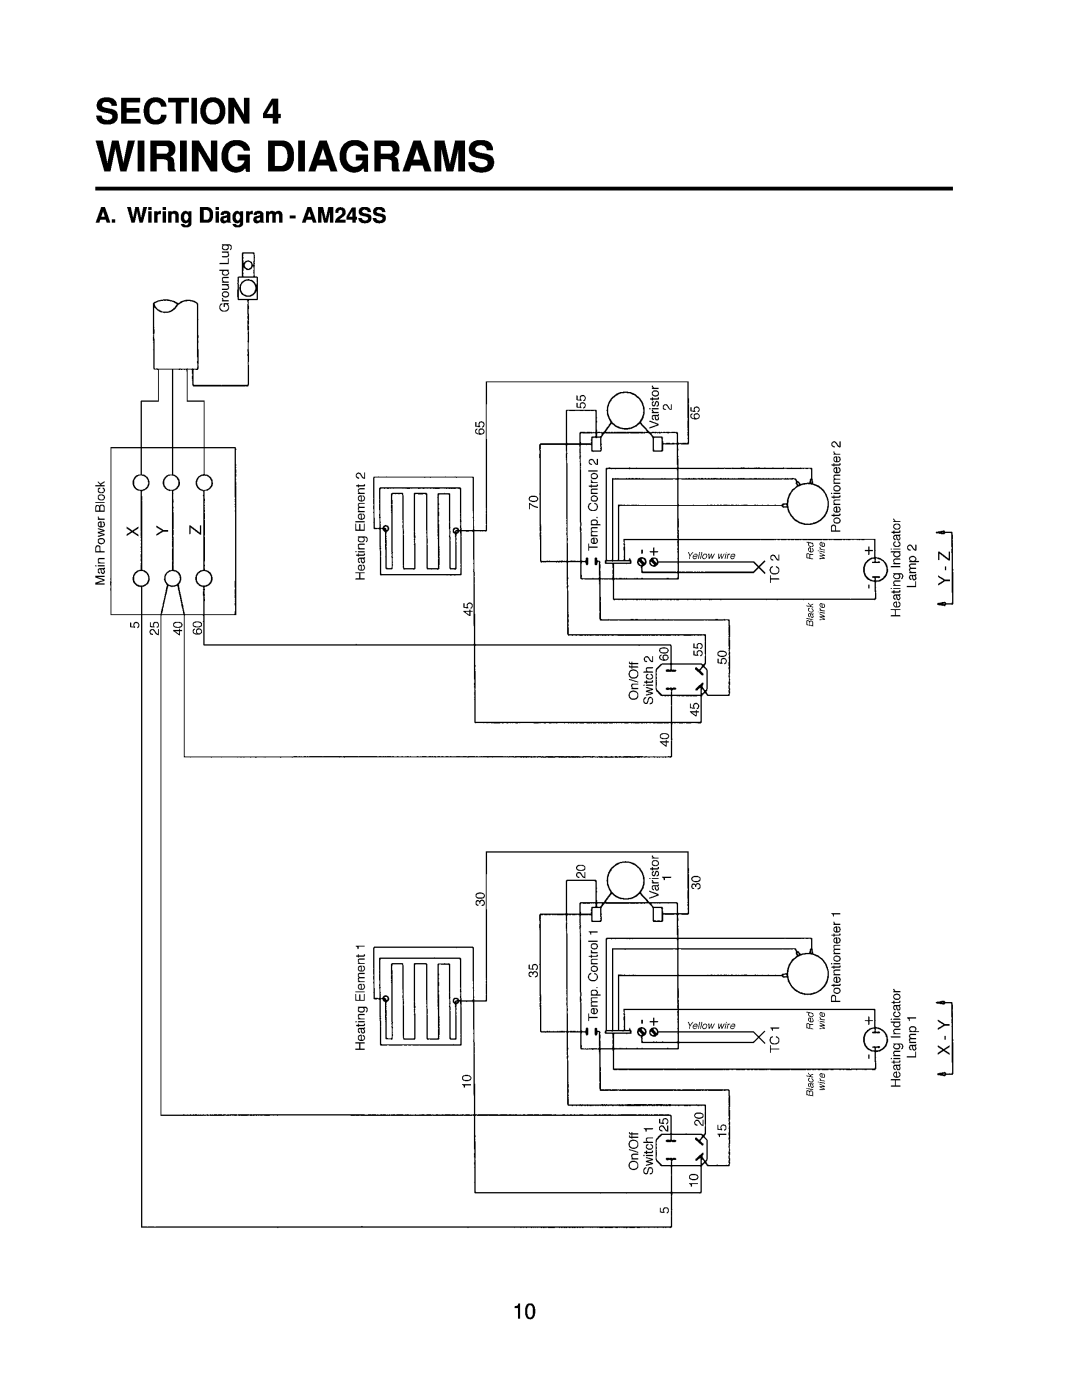 Toastmaster AM36SS installation manual Wiring Diagrams, A. Wiring Diagram - AM24SS, Section 